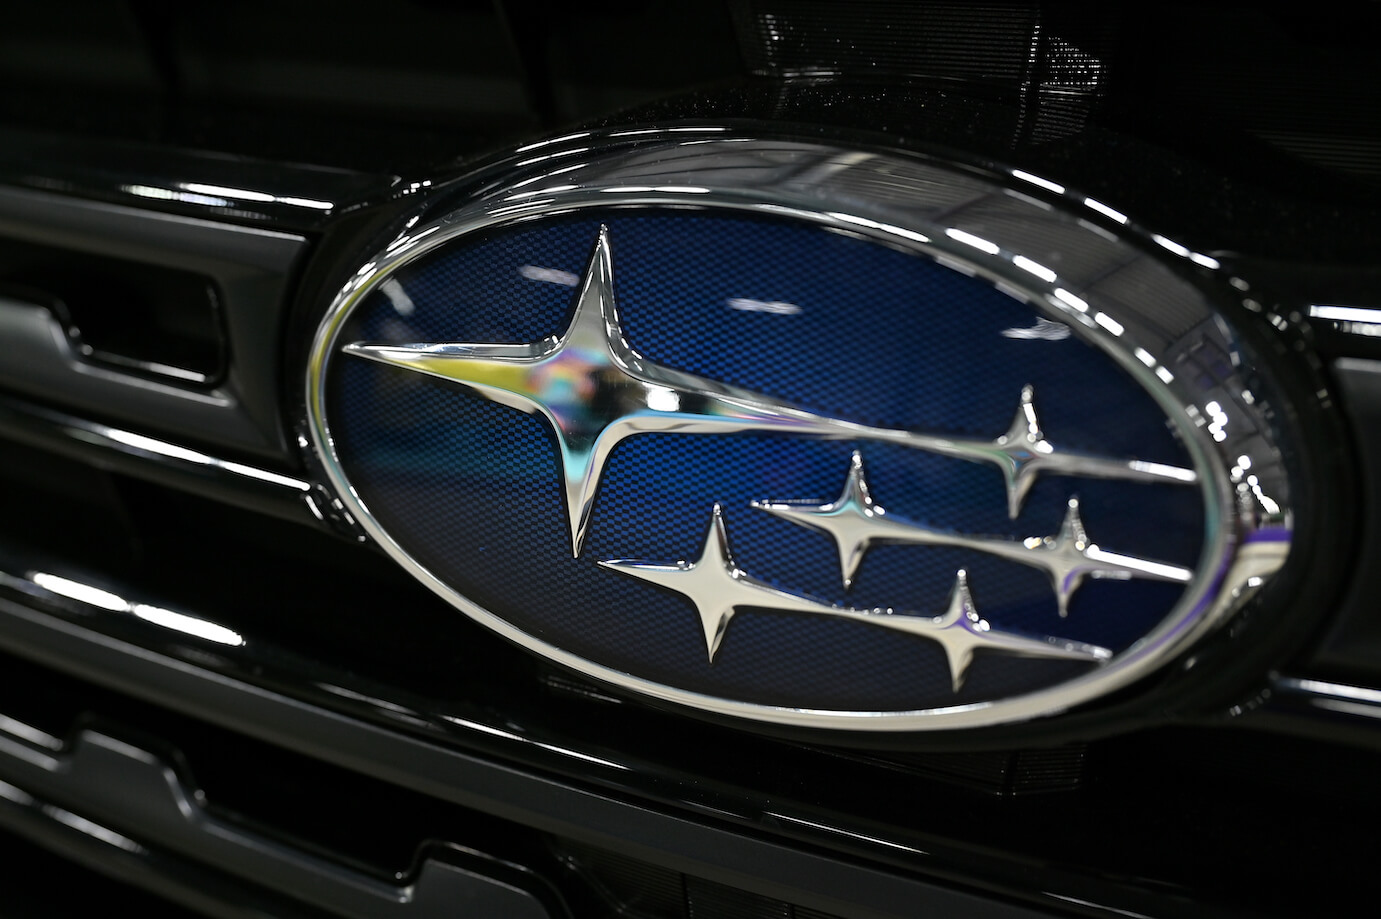 The Subaru logo on the front grille of a Subaru. Customers are very loyal to the Subaru brand.